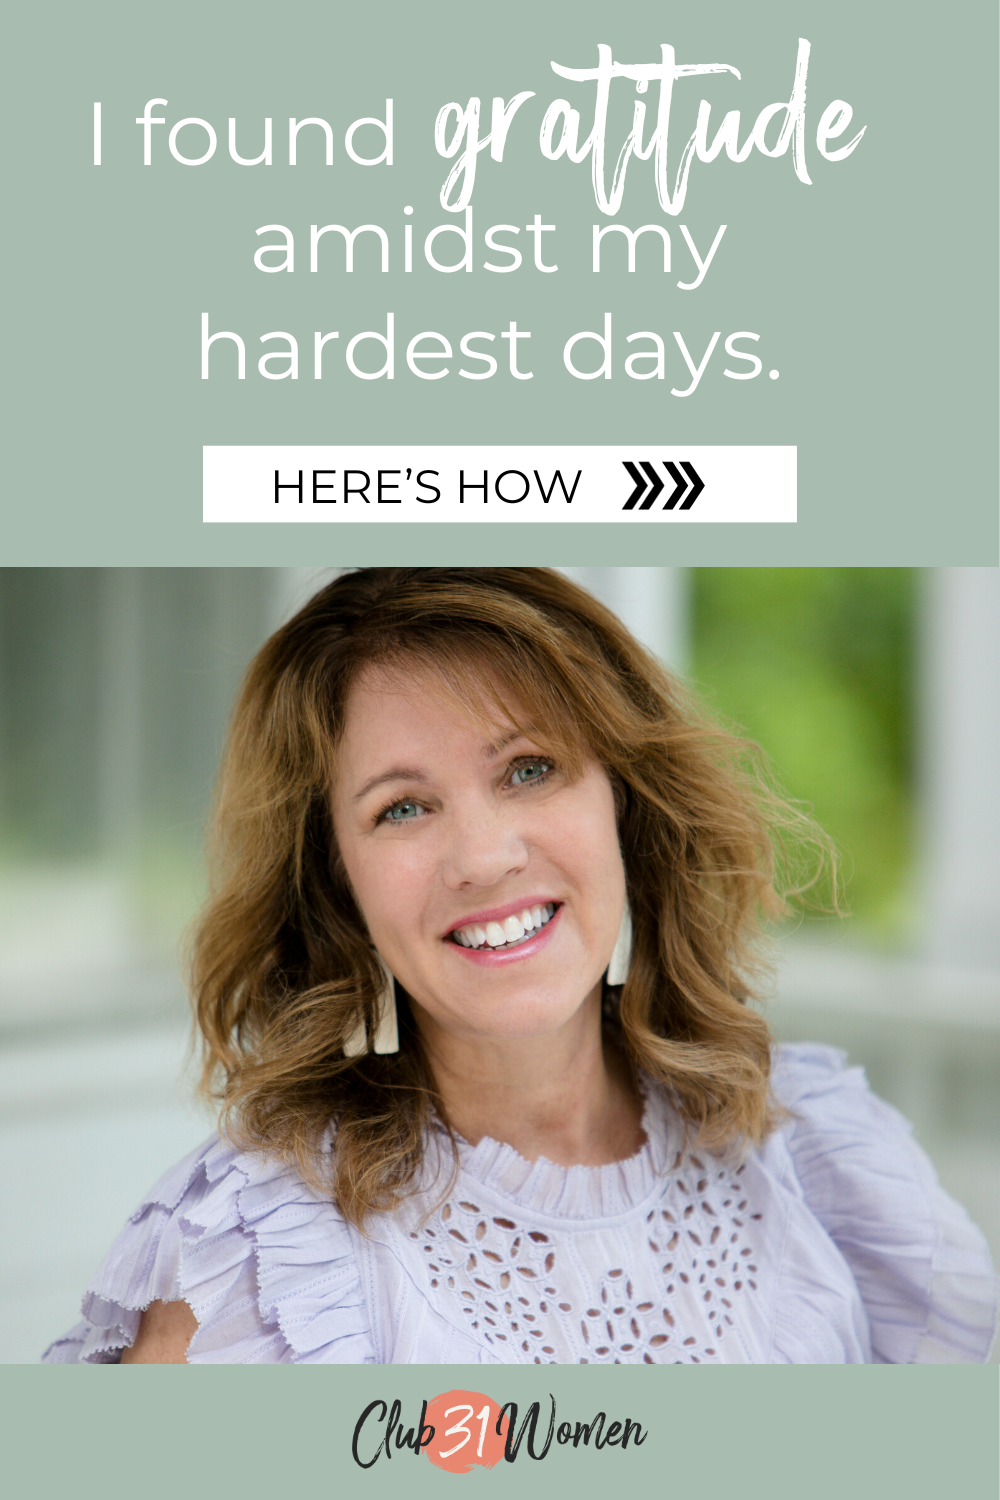 smiling woman with text overlay, "I found gratitude amidst my hardest days" from Club31Women via @Club31Women